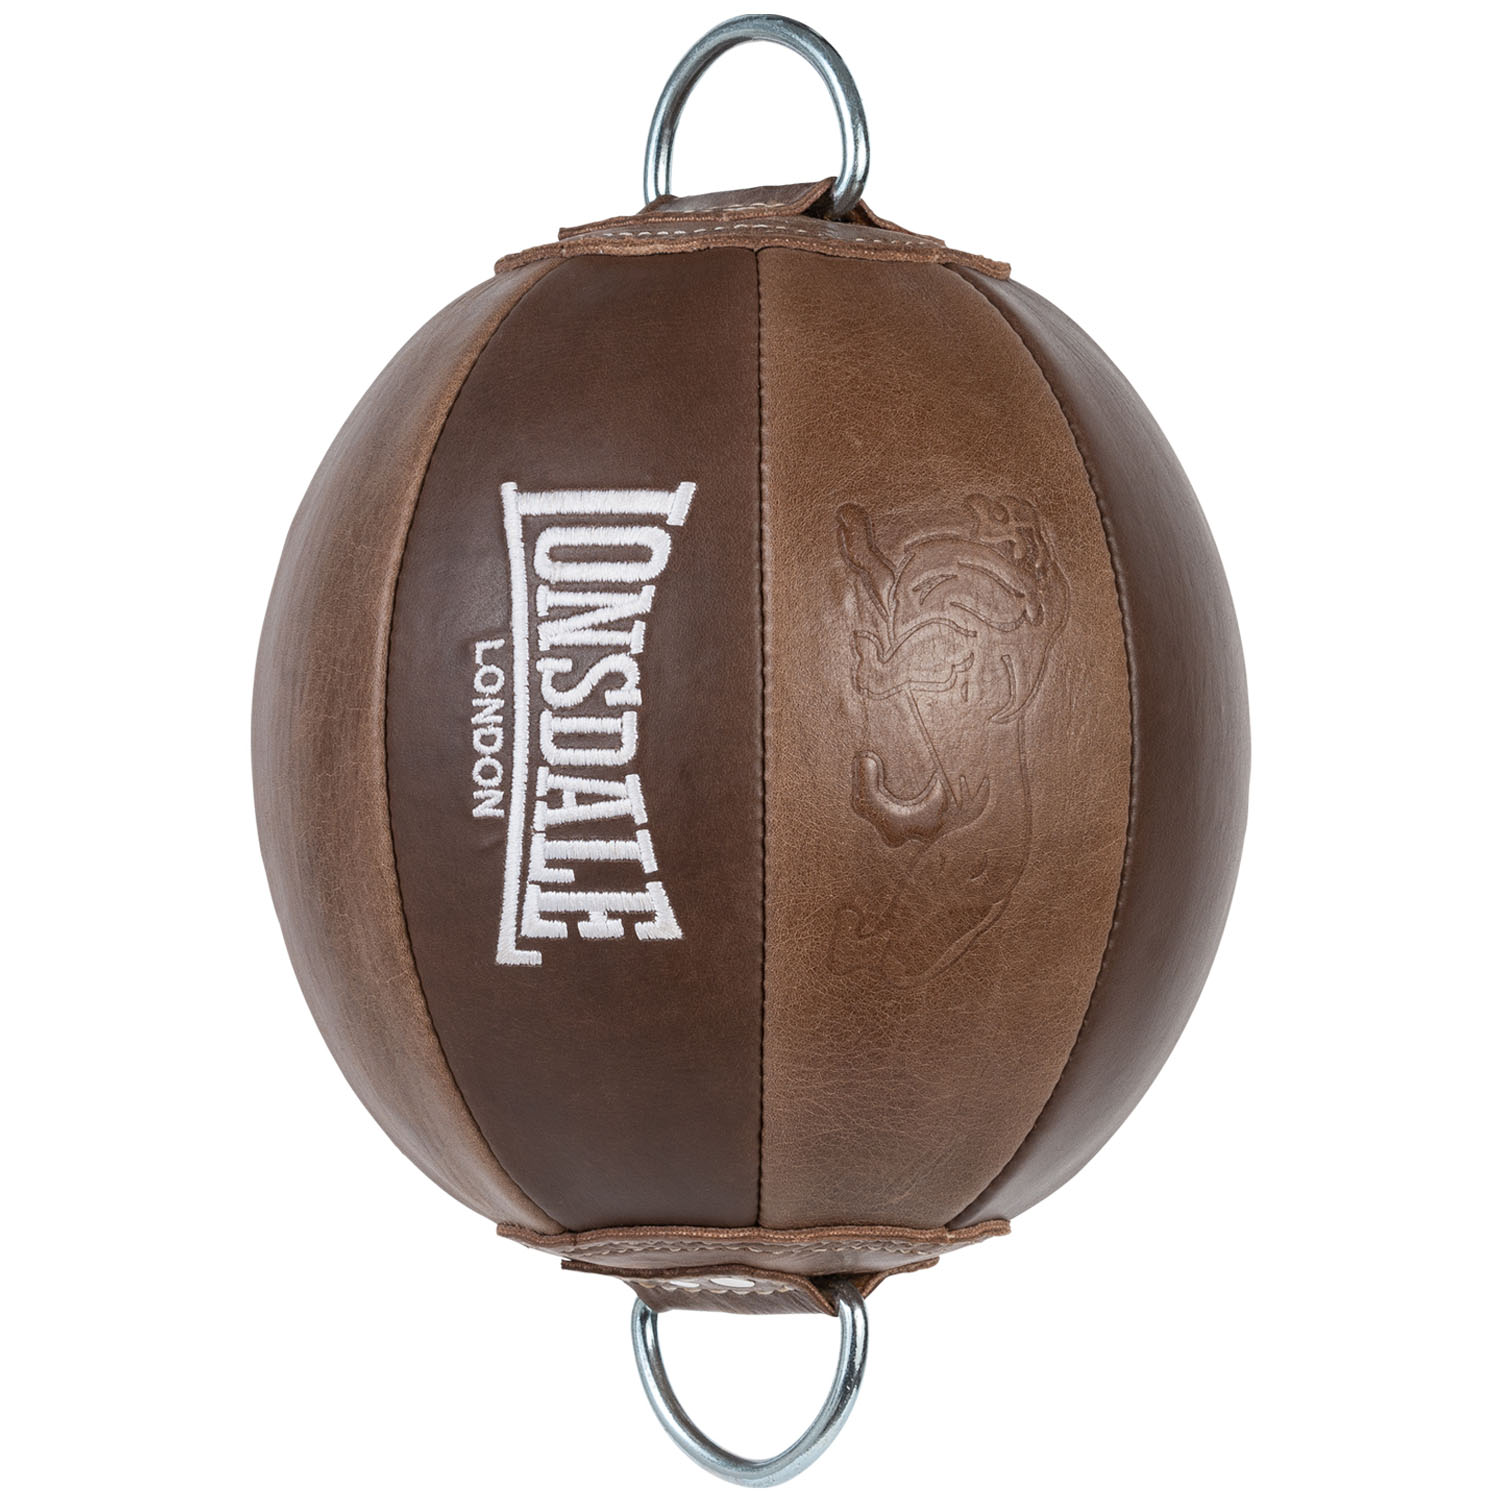 Lonsdale Double End Ball, Vintage, brown